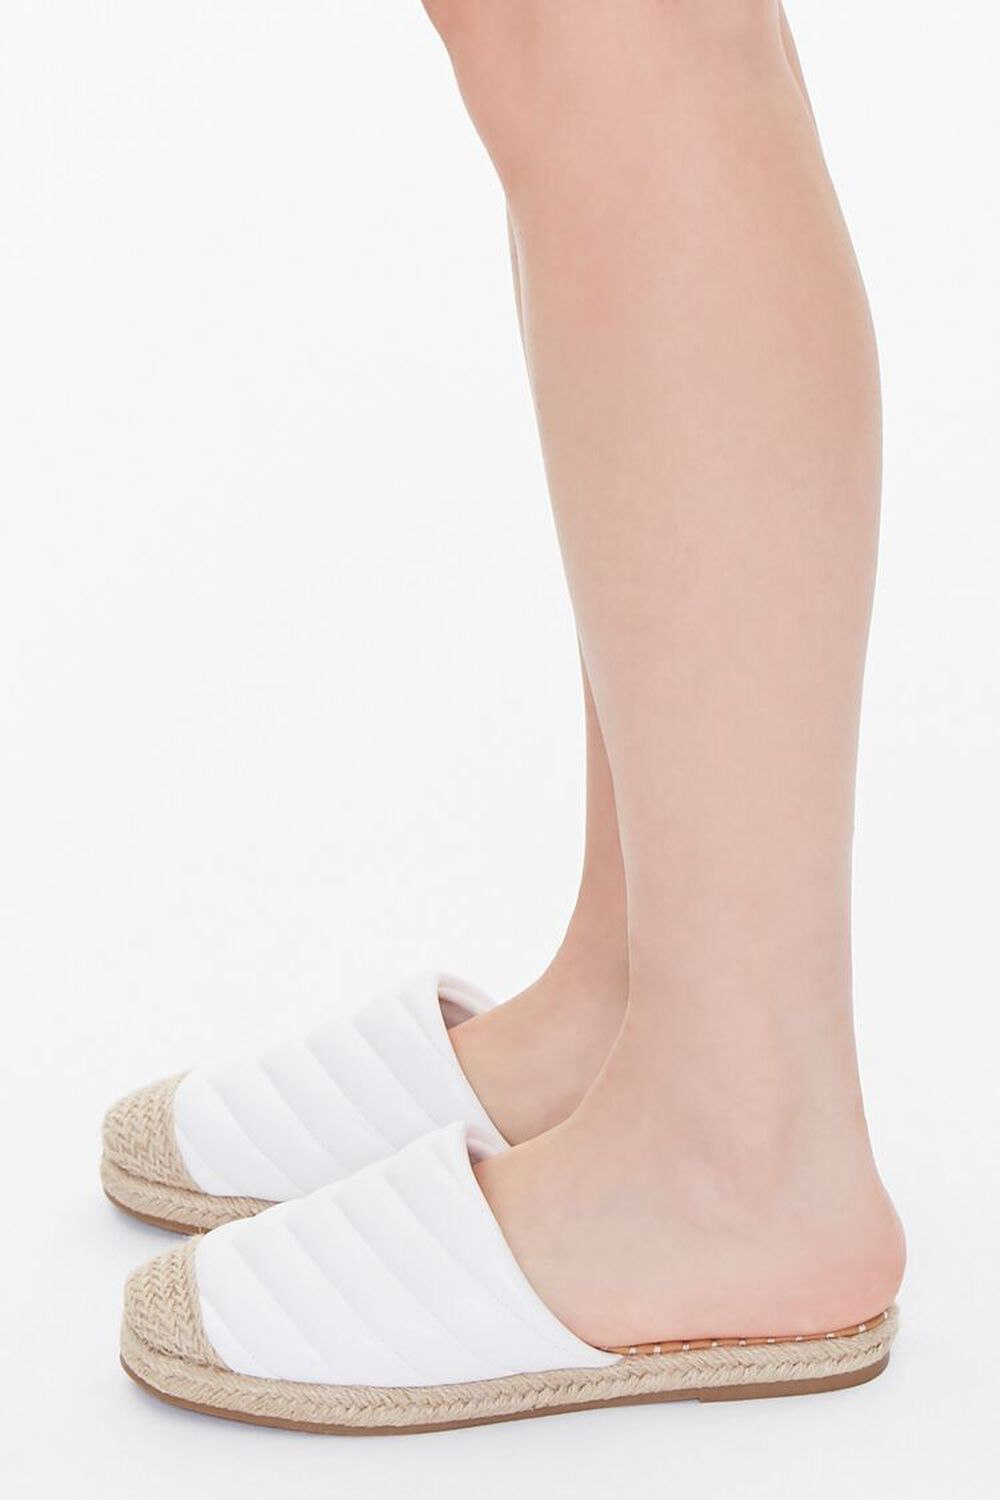 WHITE Quilted Espadrille Flats, image 2